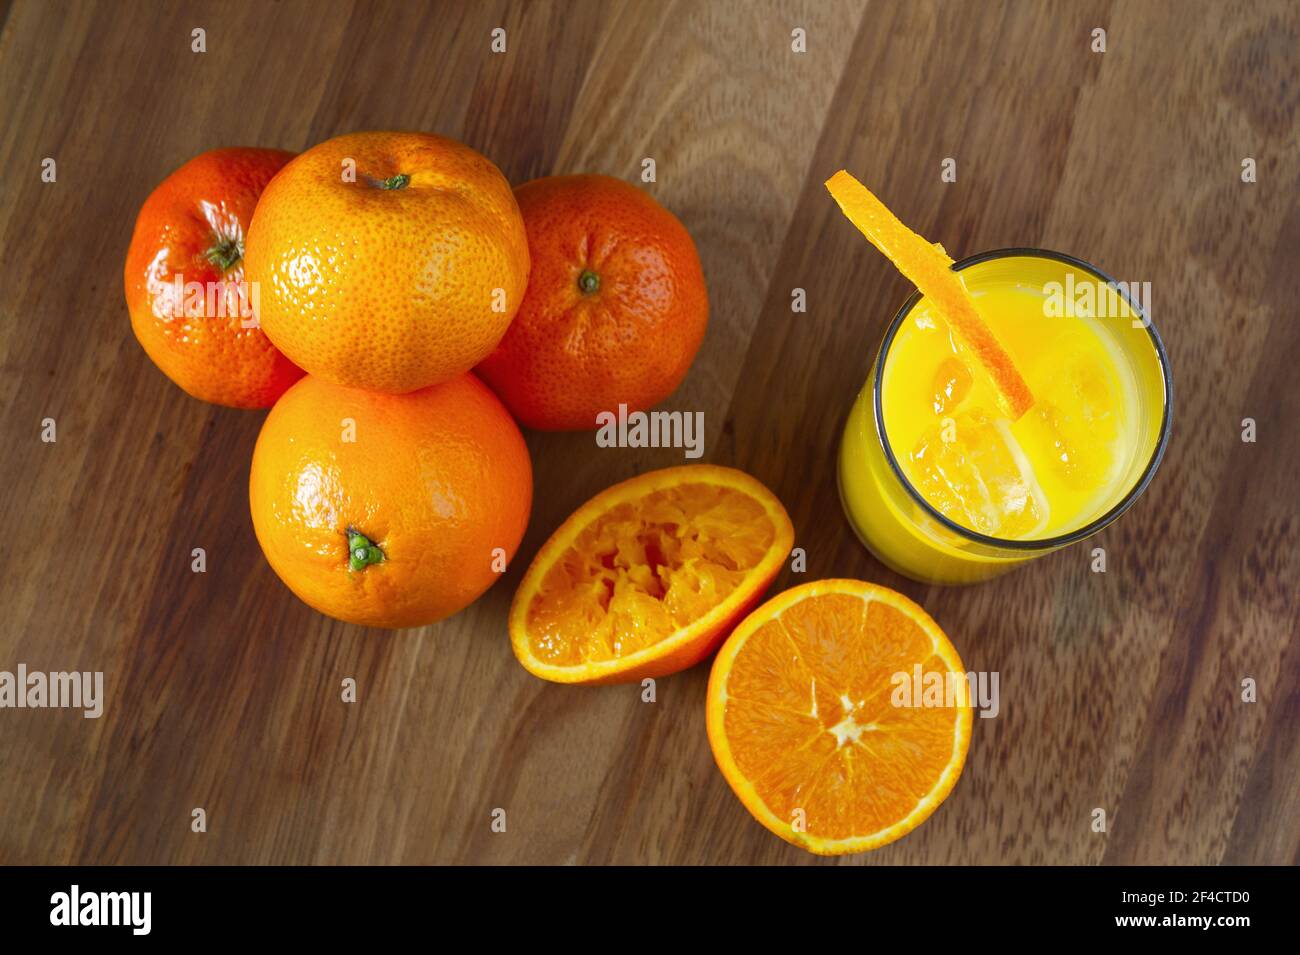 Viewed from above Orange Juice and a pile of Oranges to the left. Orange Half and a Squeezed Oranges in the Centre. placed on a wooded board. Stock Photo